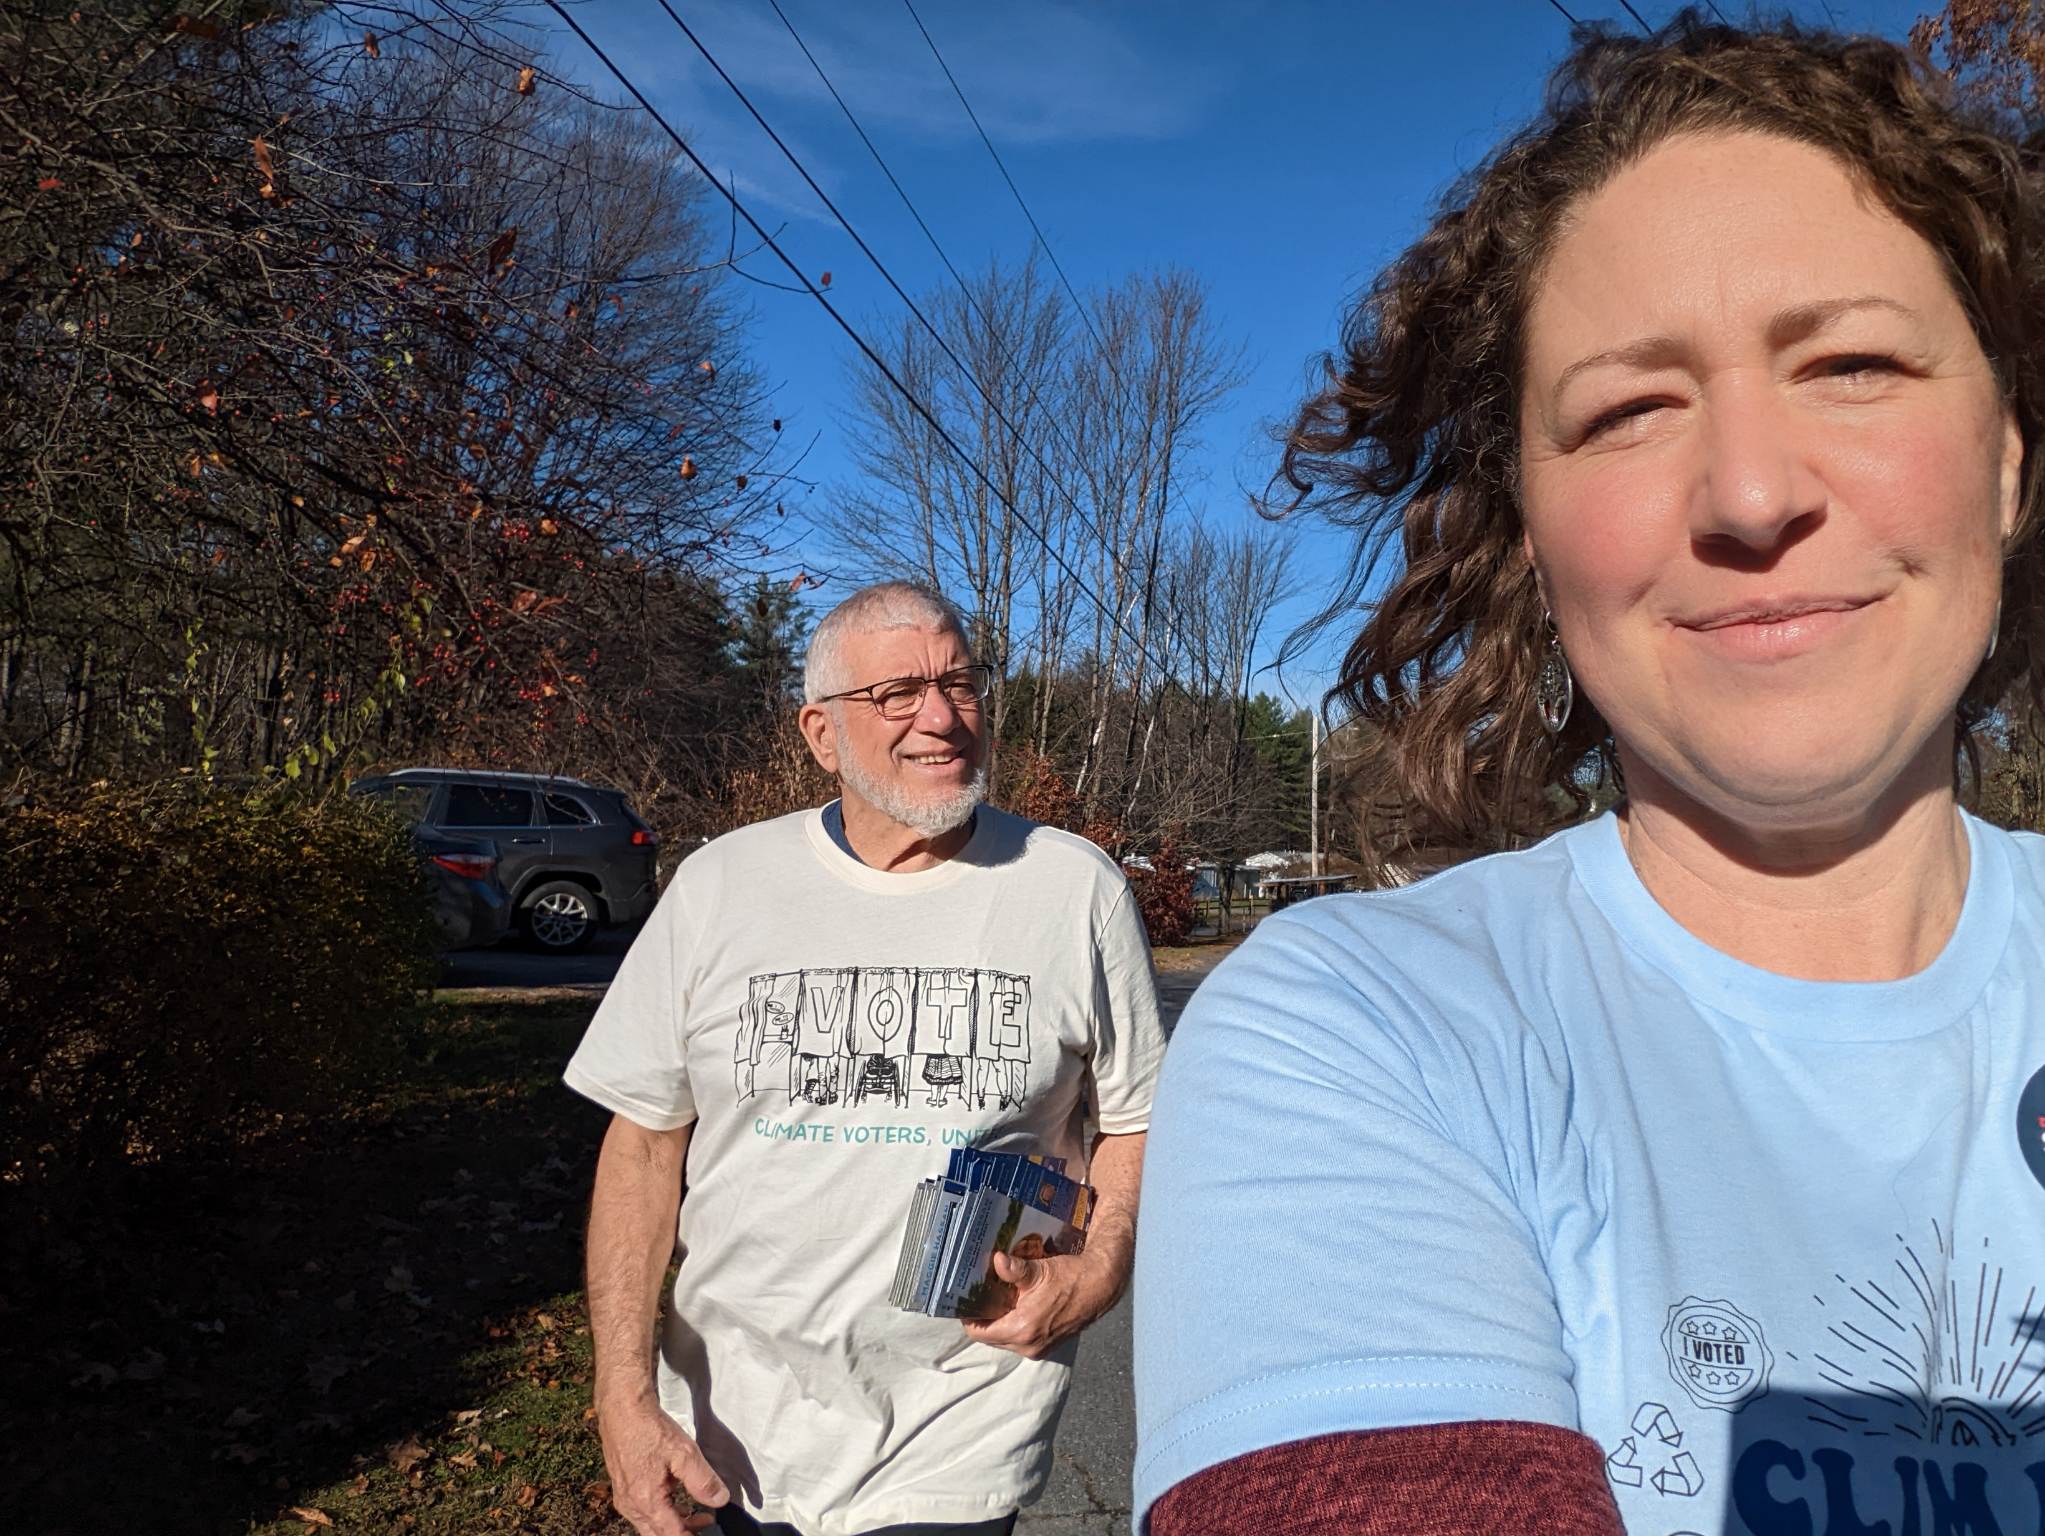 Two People Wearing EDF Action Shirts Pose for a Selfie in Claremont, NH.